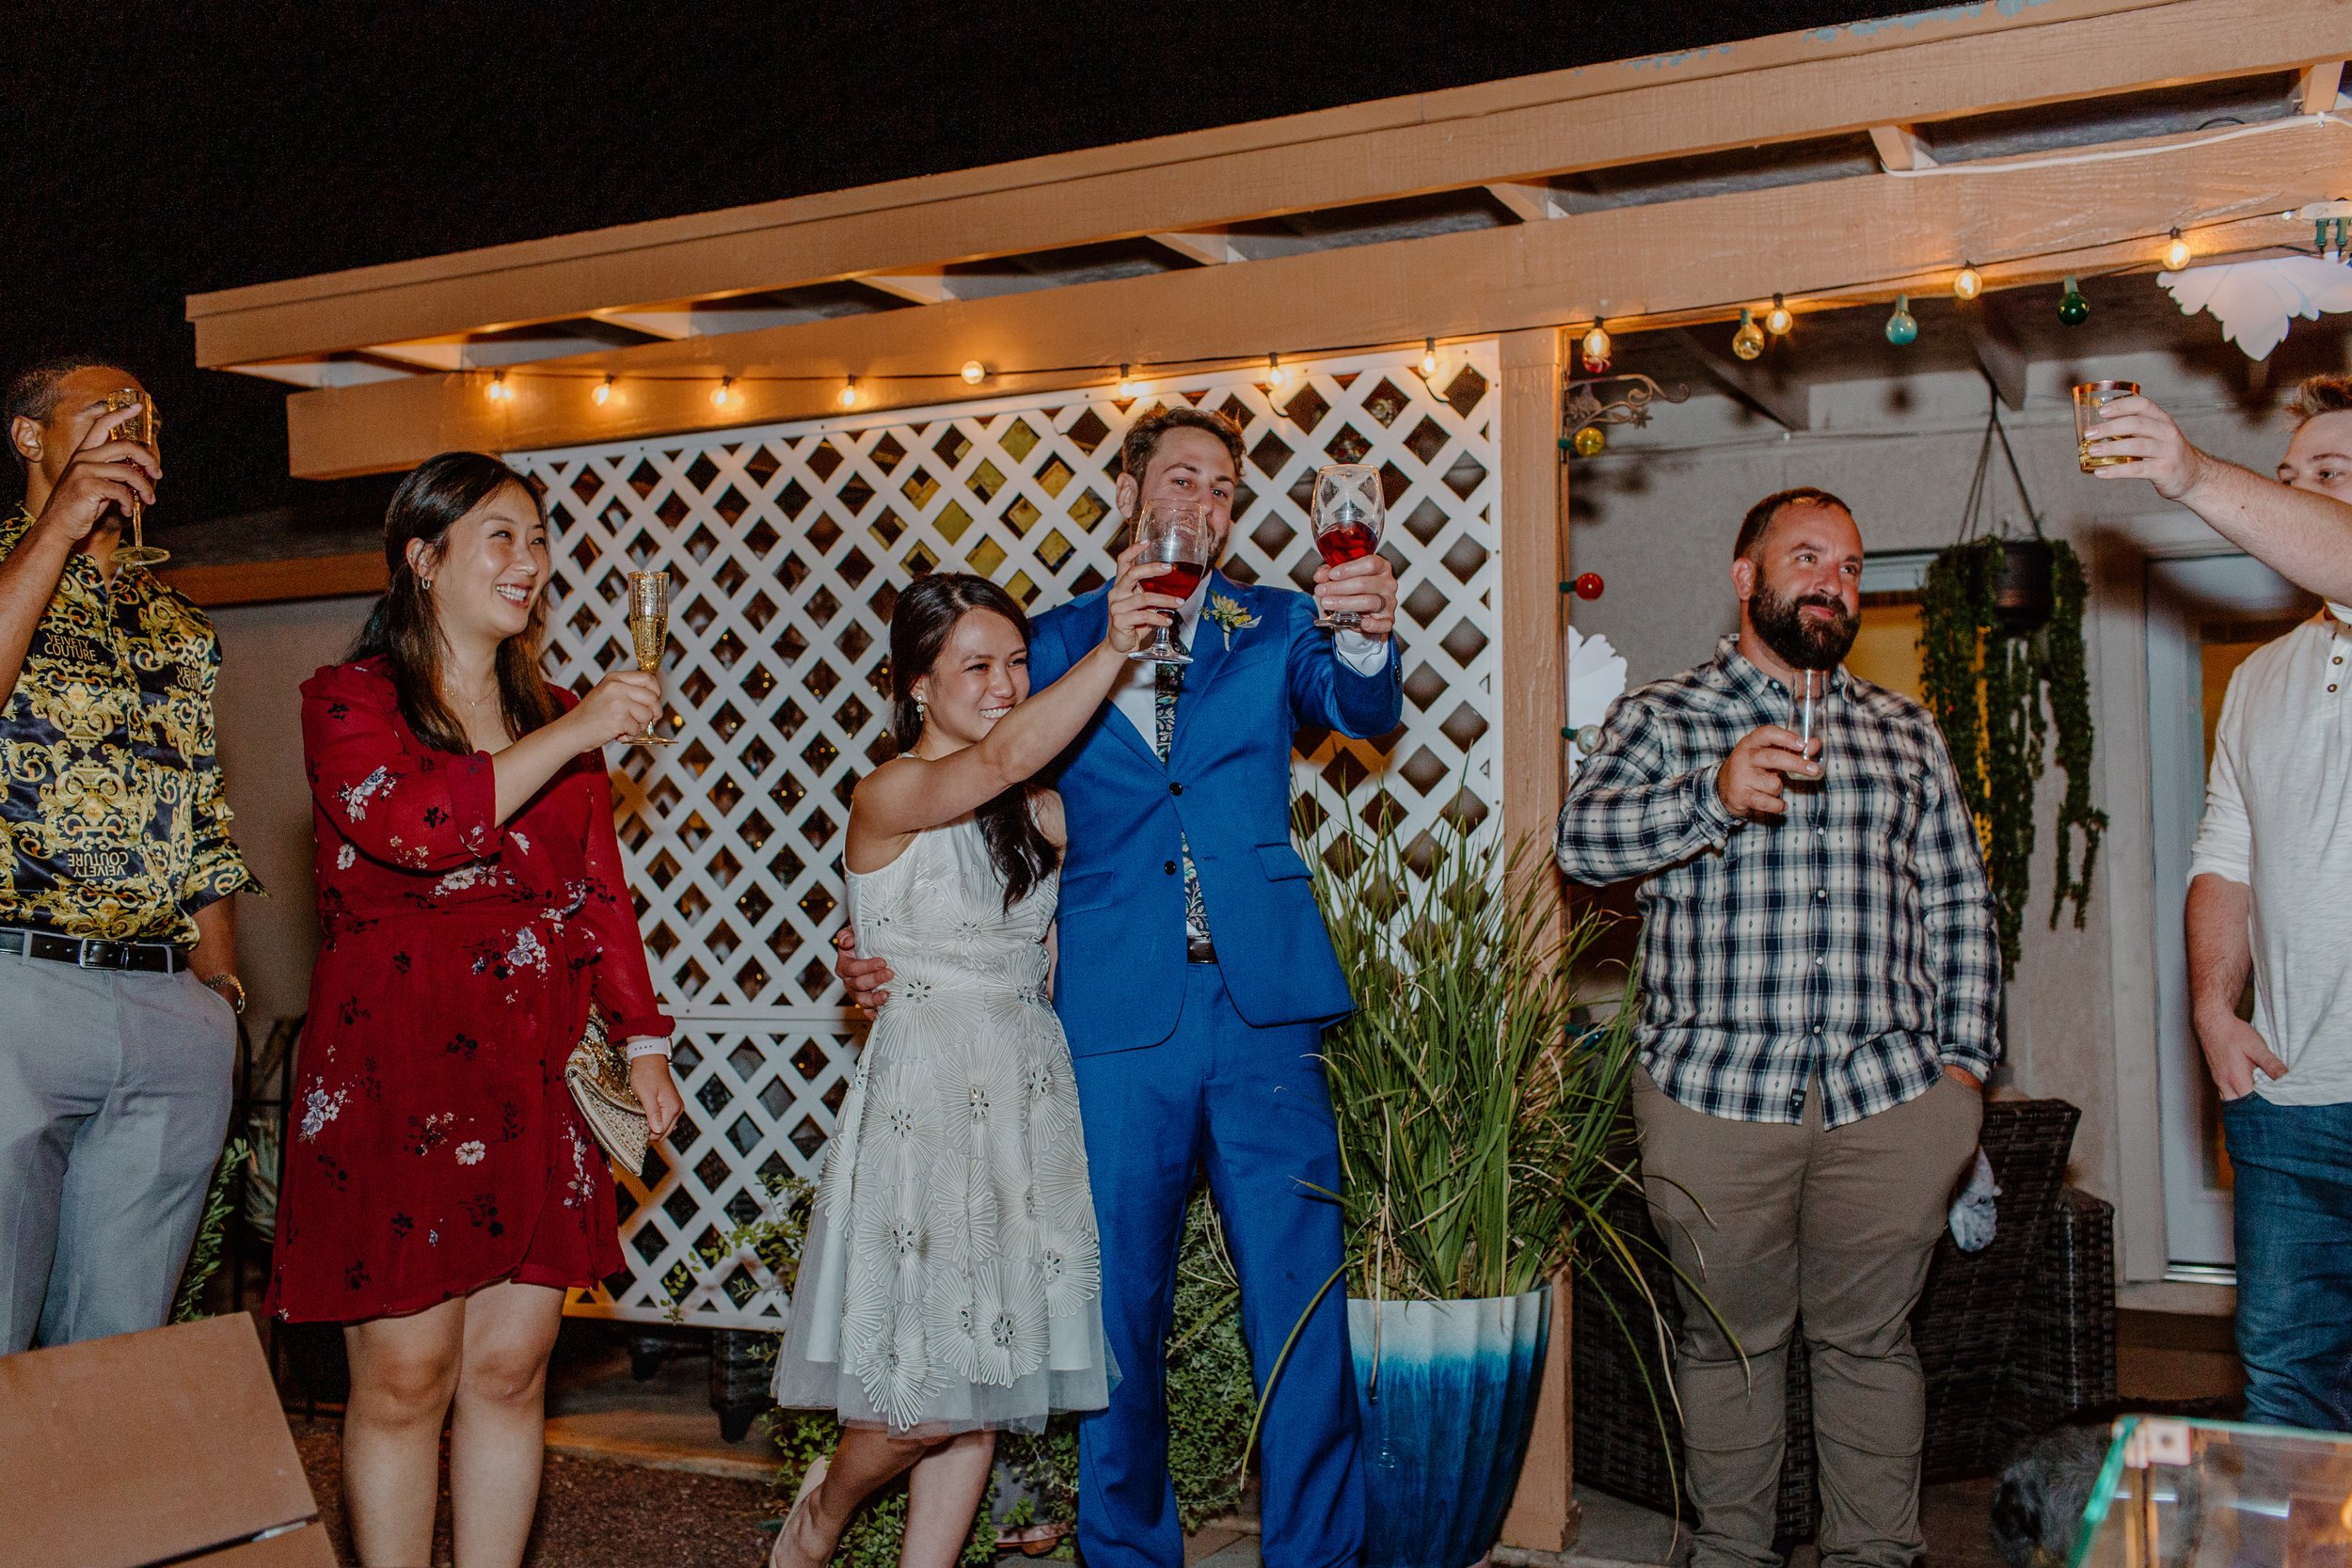  bride and groom with guests toast Champagne glasses at reception by Arizona elopement photographer 